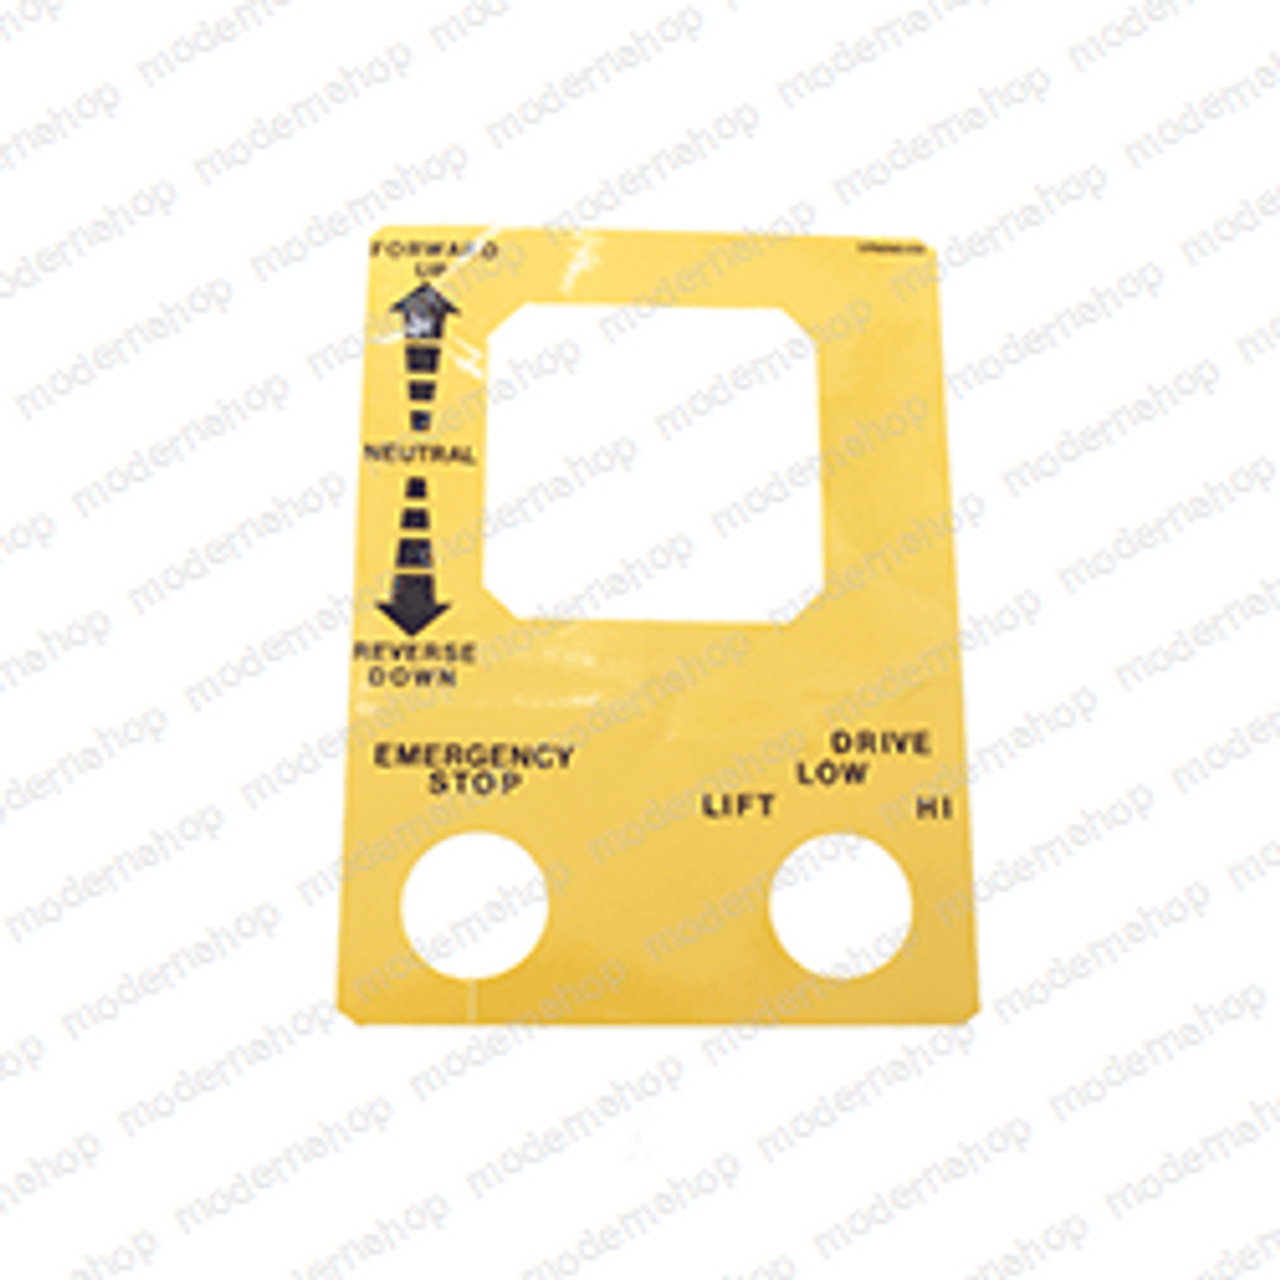 066560-010: Upright DECAL - CONTROLLER X20